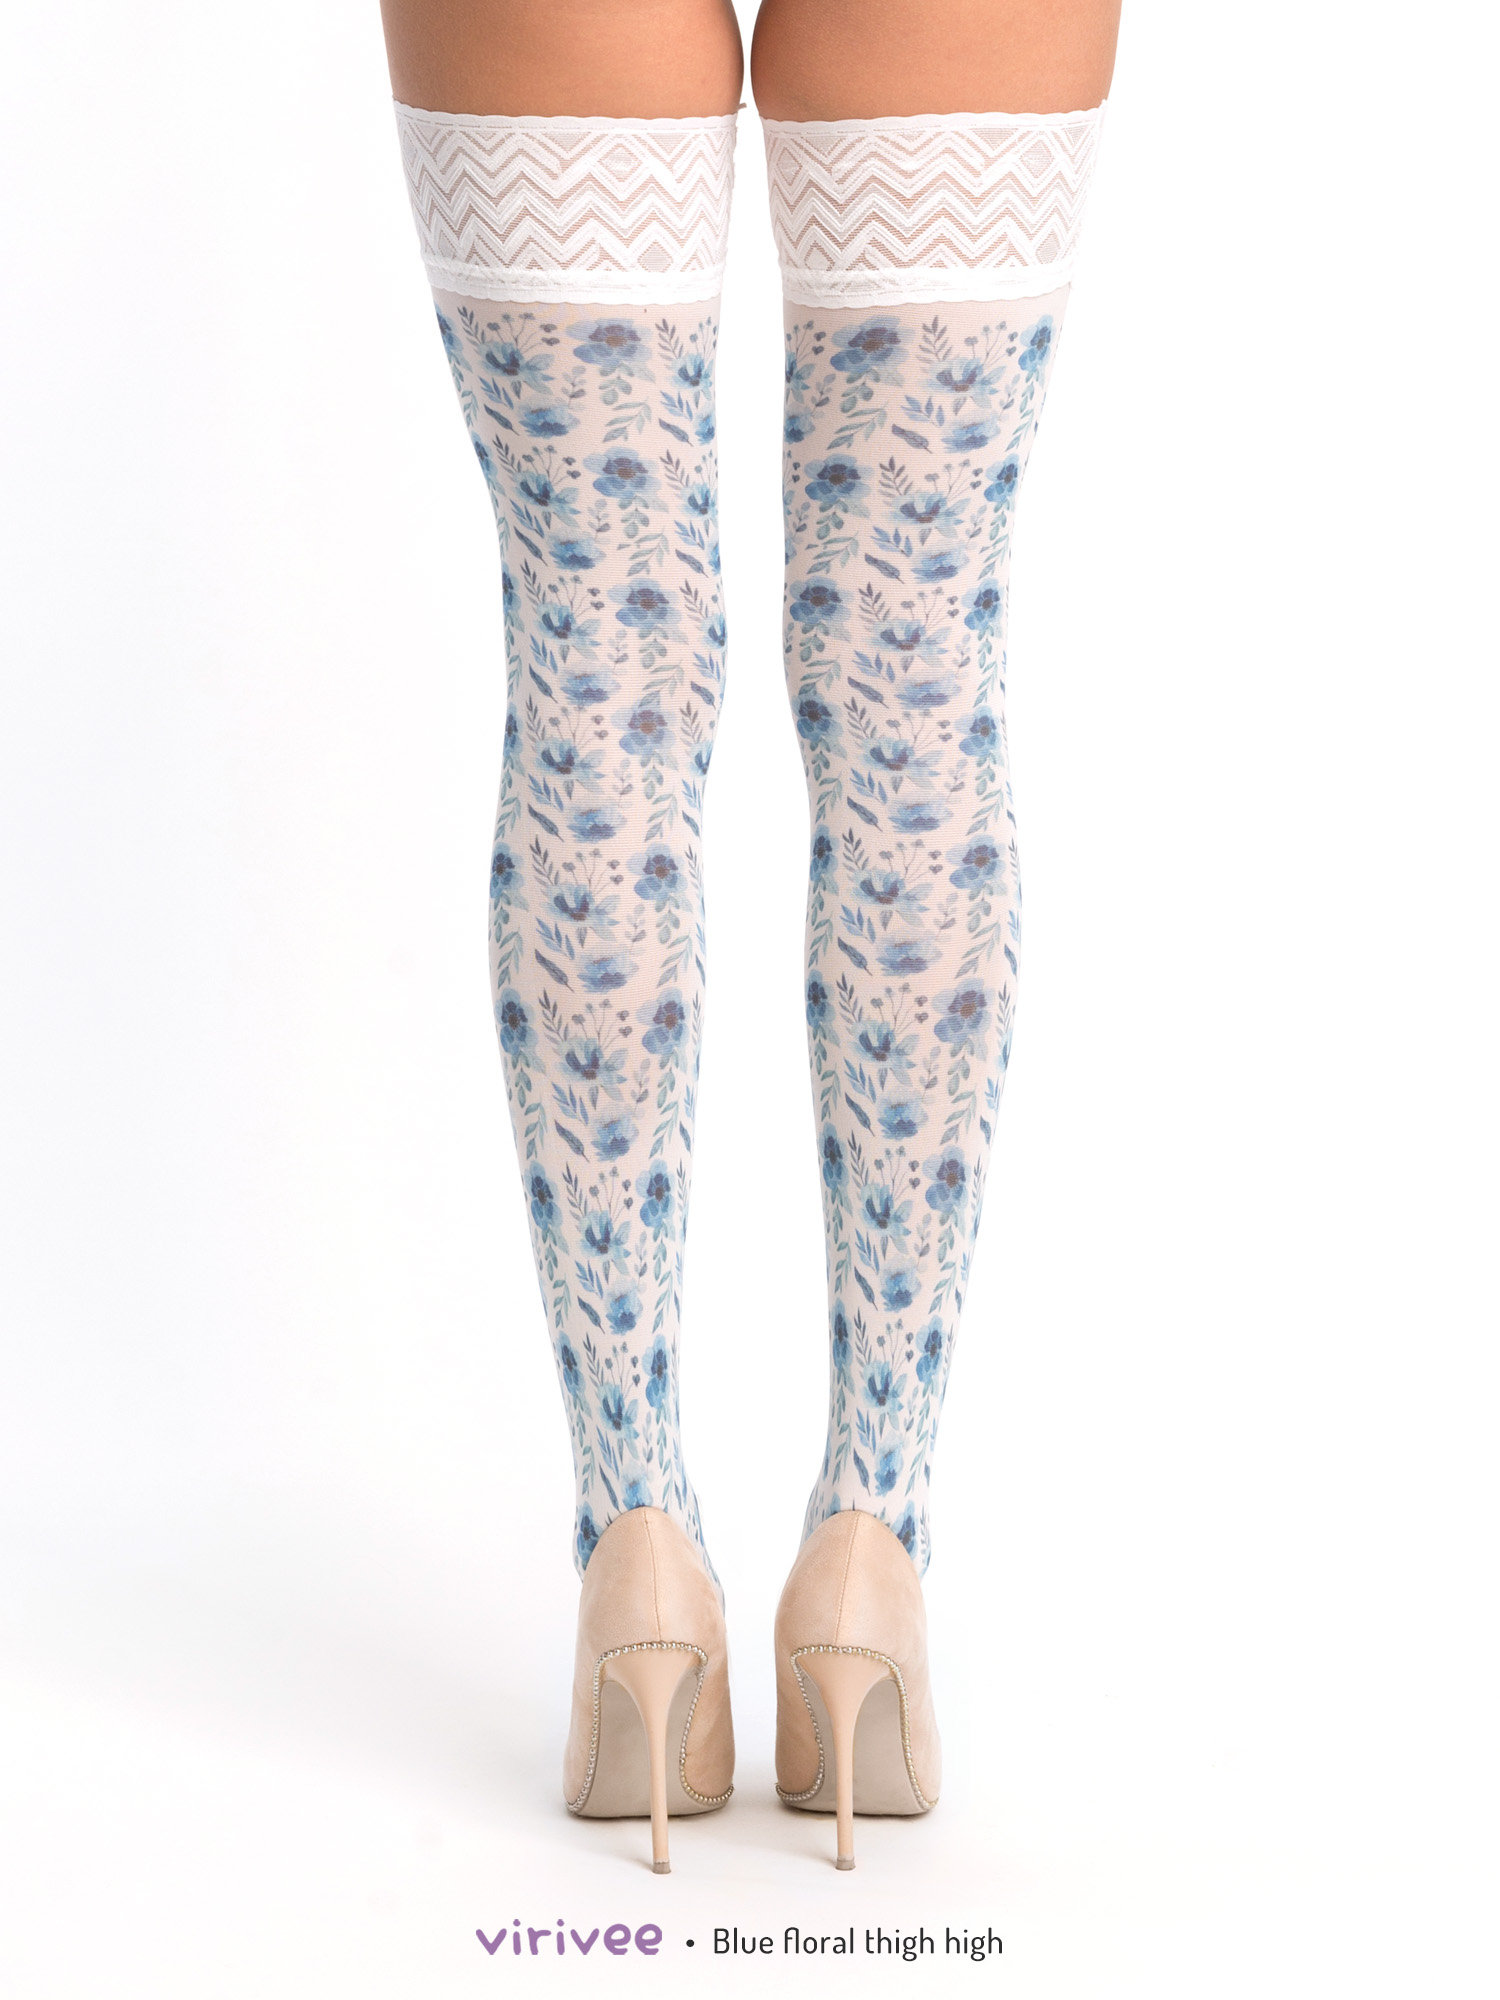 Small blue floral thigh high stay-up